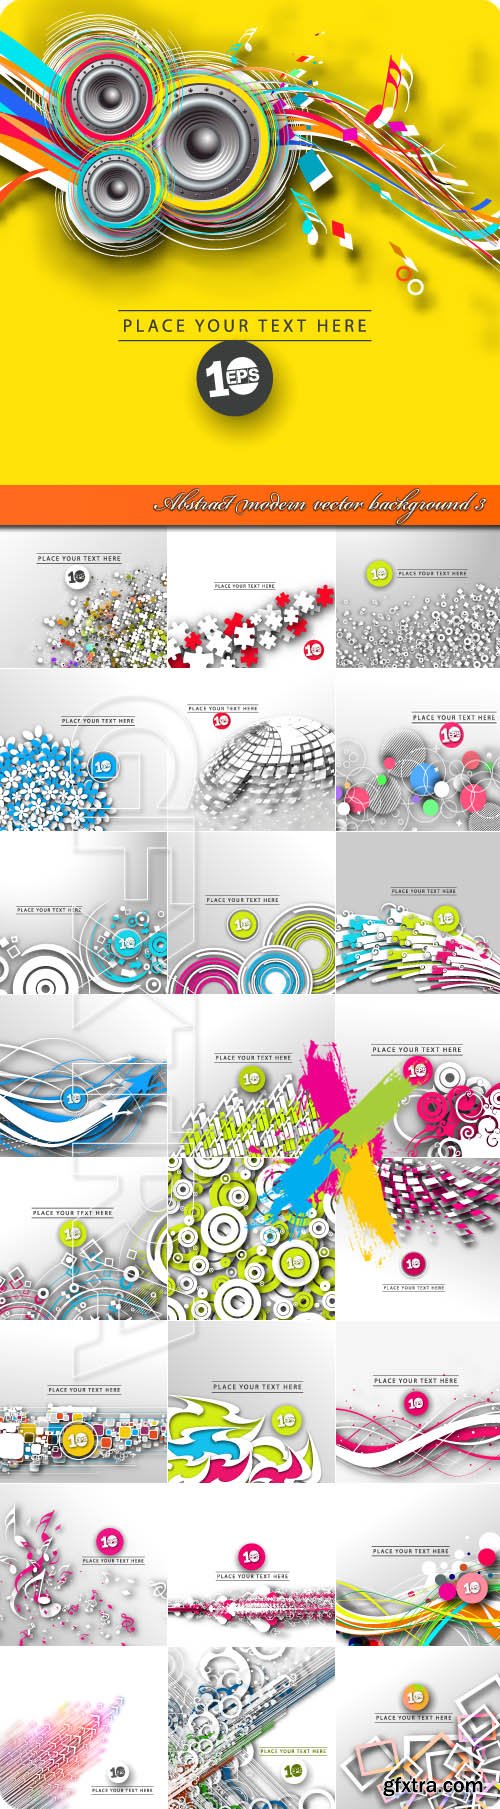 Abstract modern vector background 3